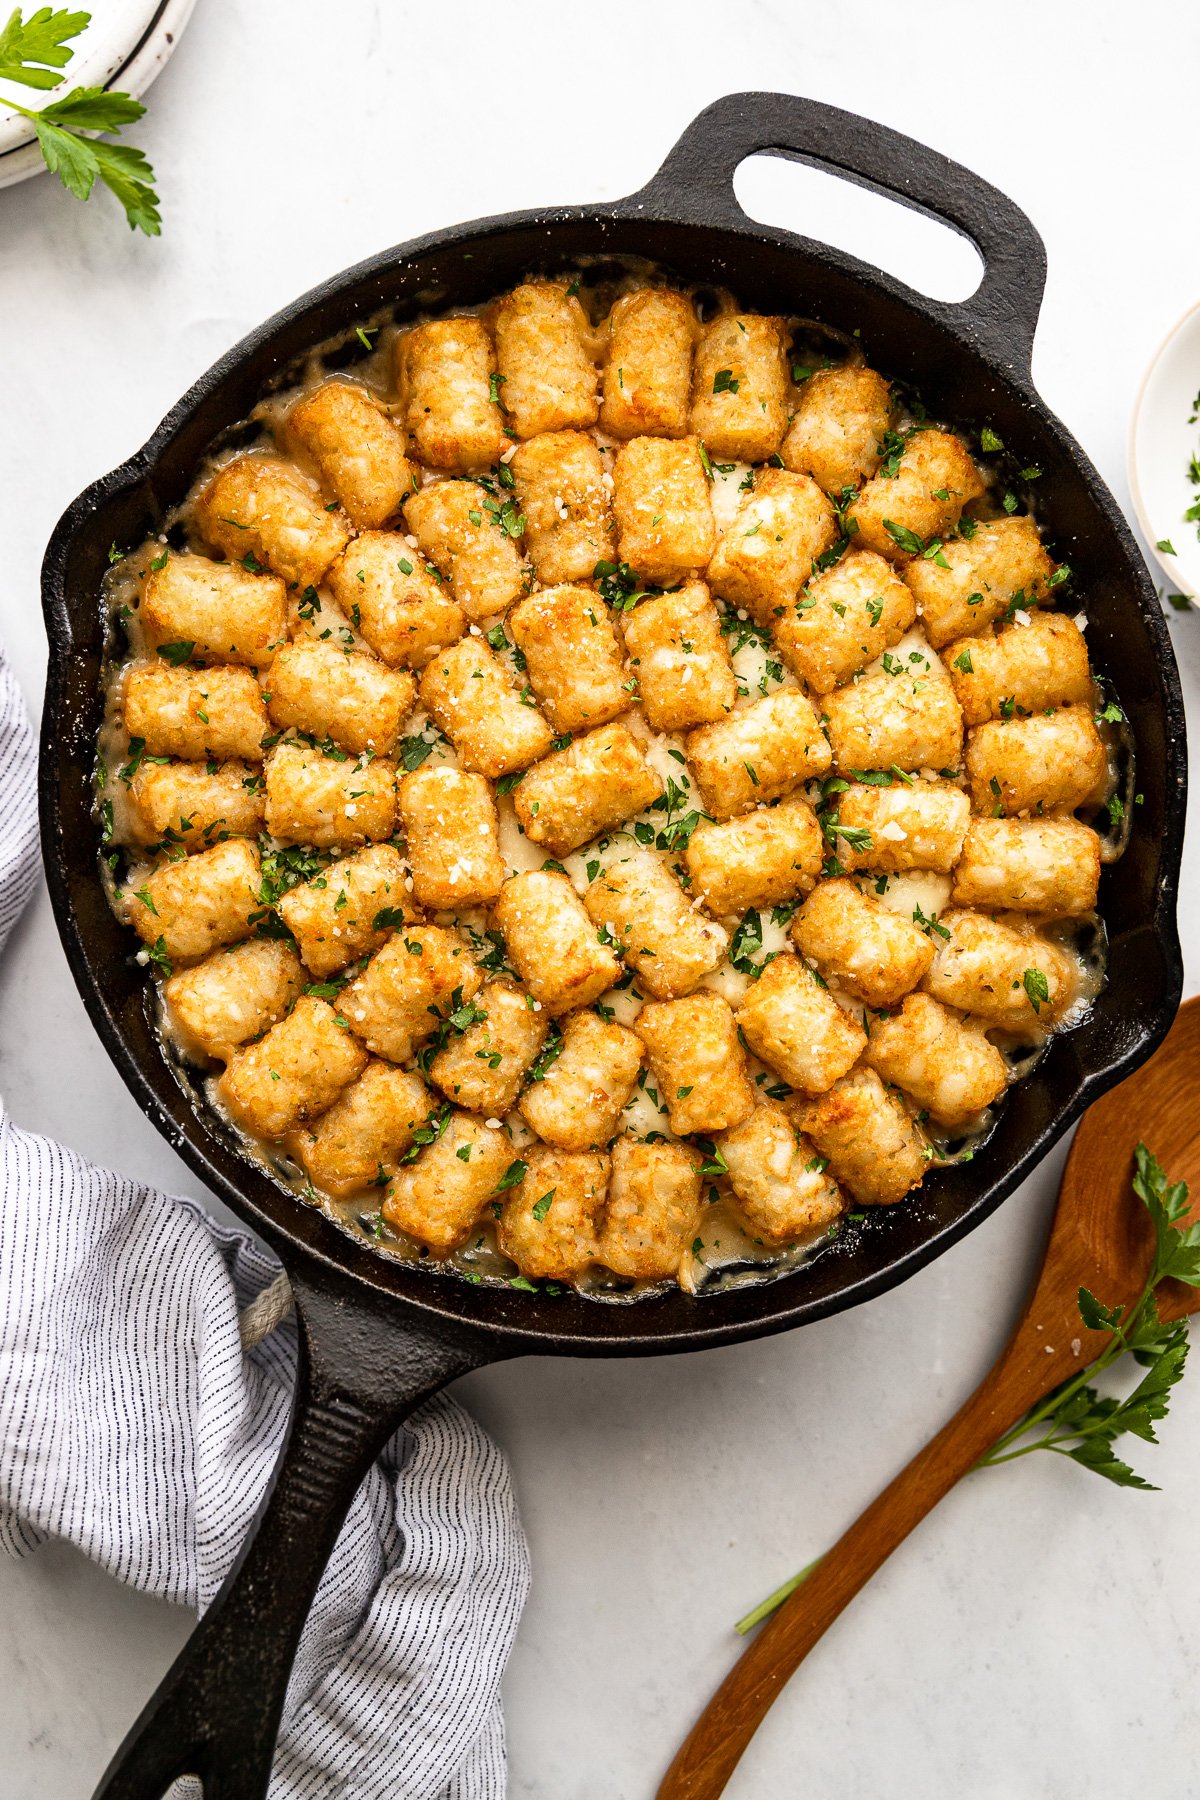 Tater Tot hotdish in cast iron skillet after baking next to serving spoon.